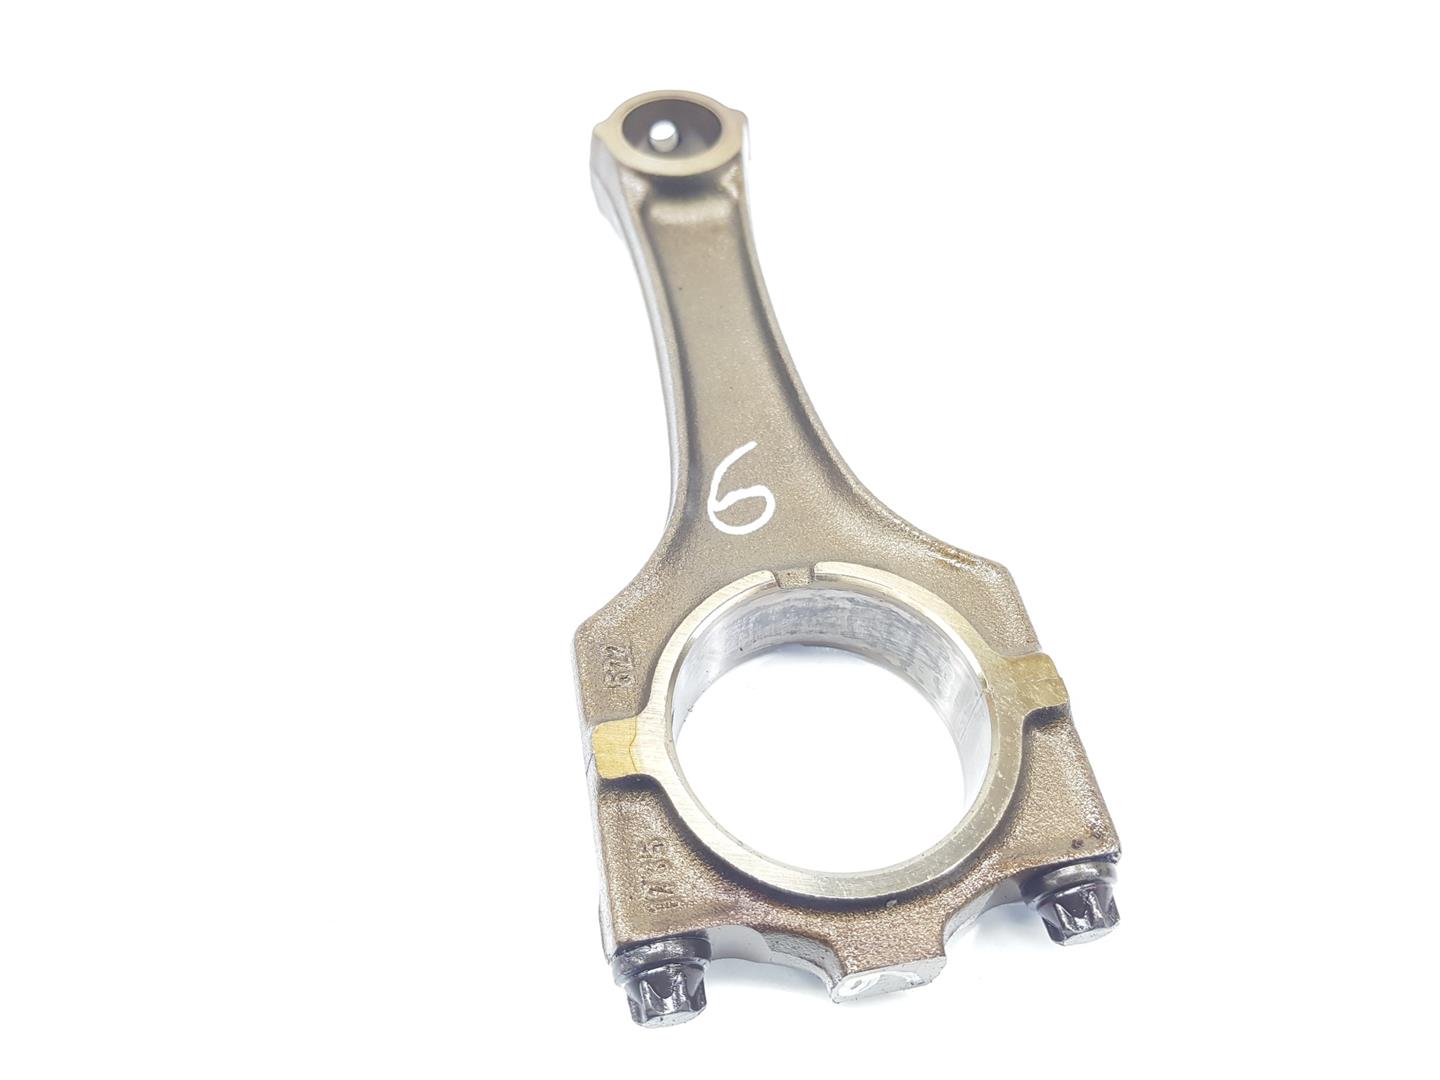 BMW 3 Series E36 (1990-2000) Connecting Rod 11241437212, 11241437212, 1111AA 24228953